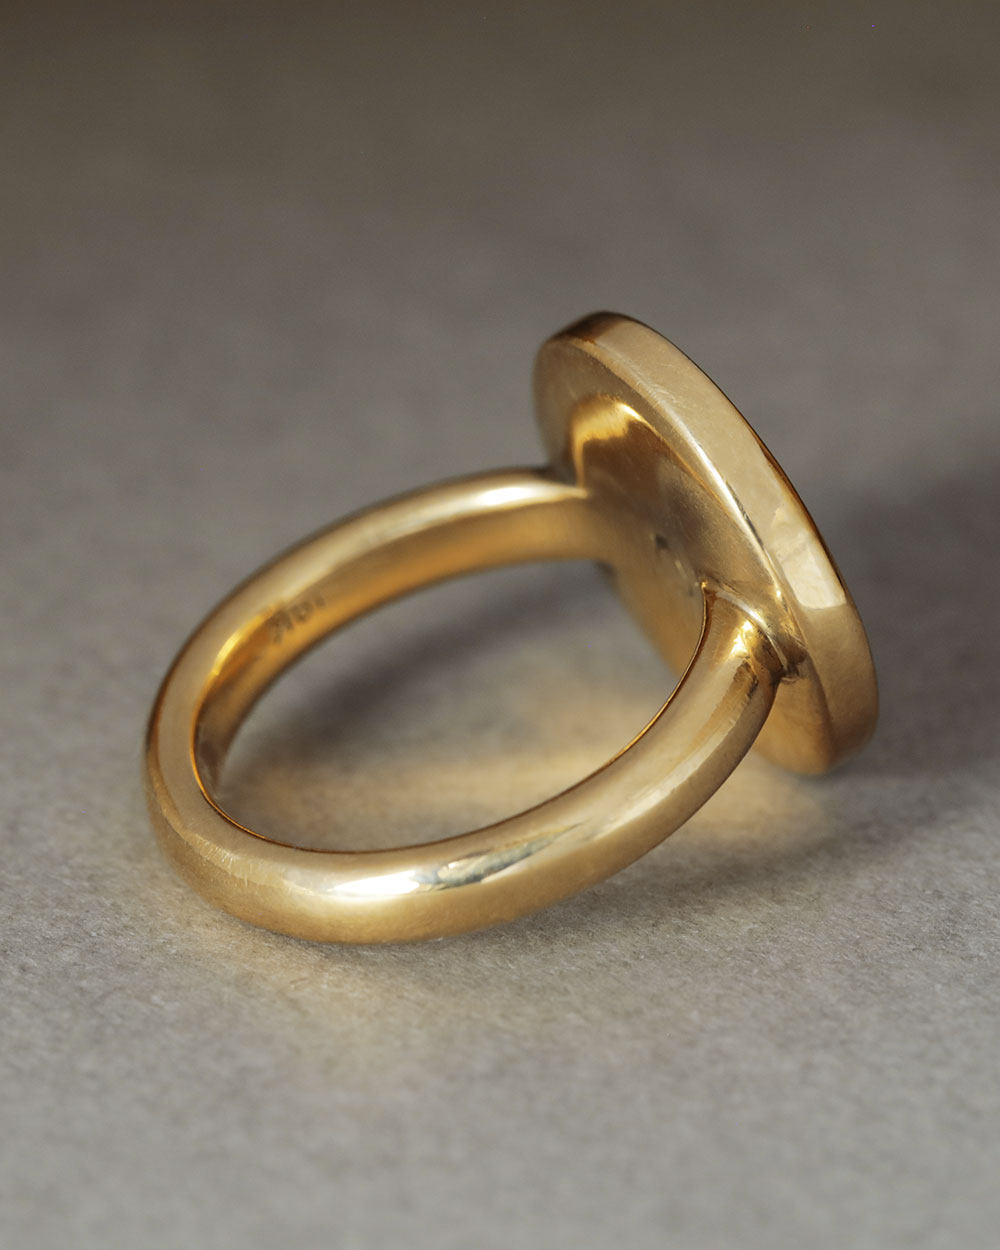 solid 18k yellow gold Dutch Coin ring. Large circle of gold with a slight puff in the center and softened, thick edges. 